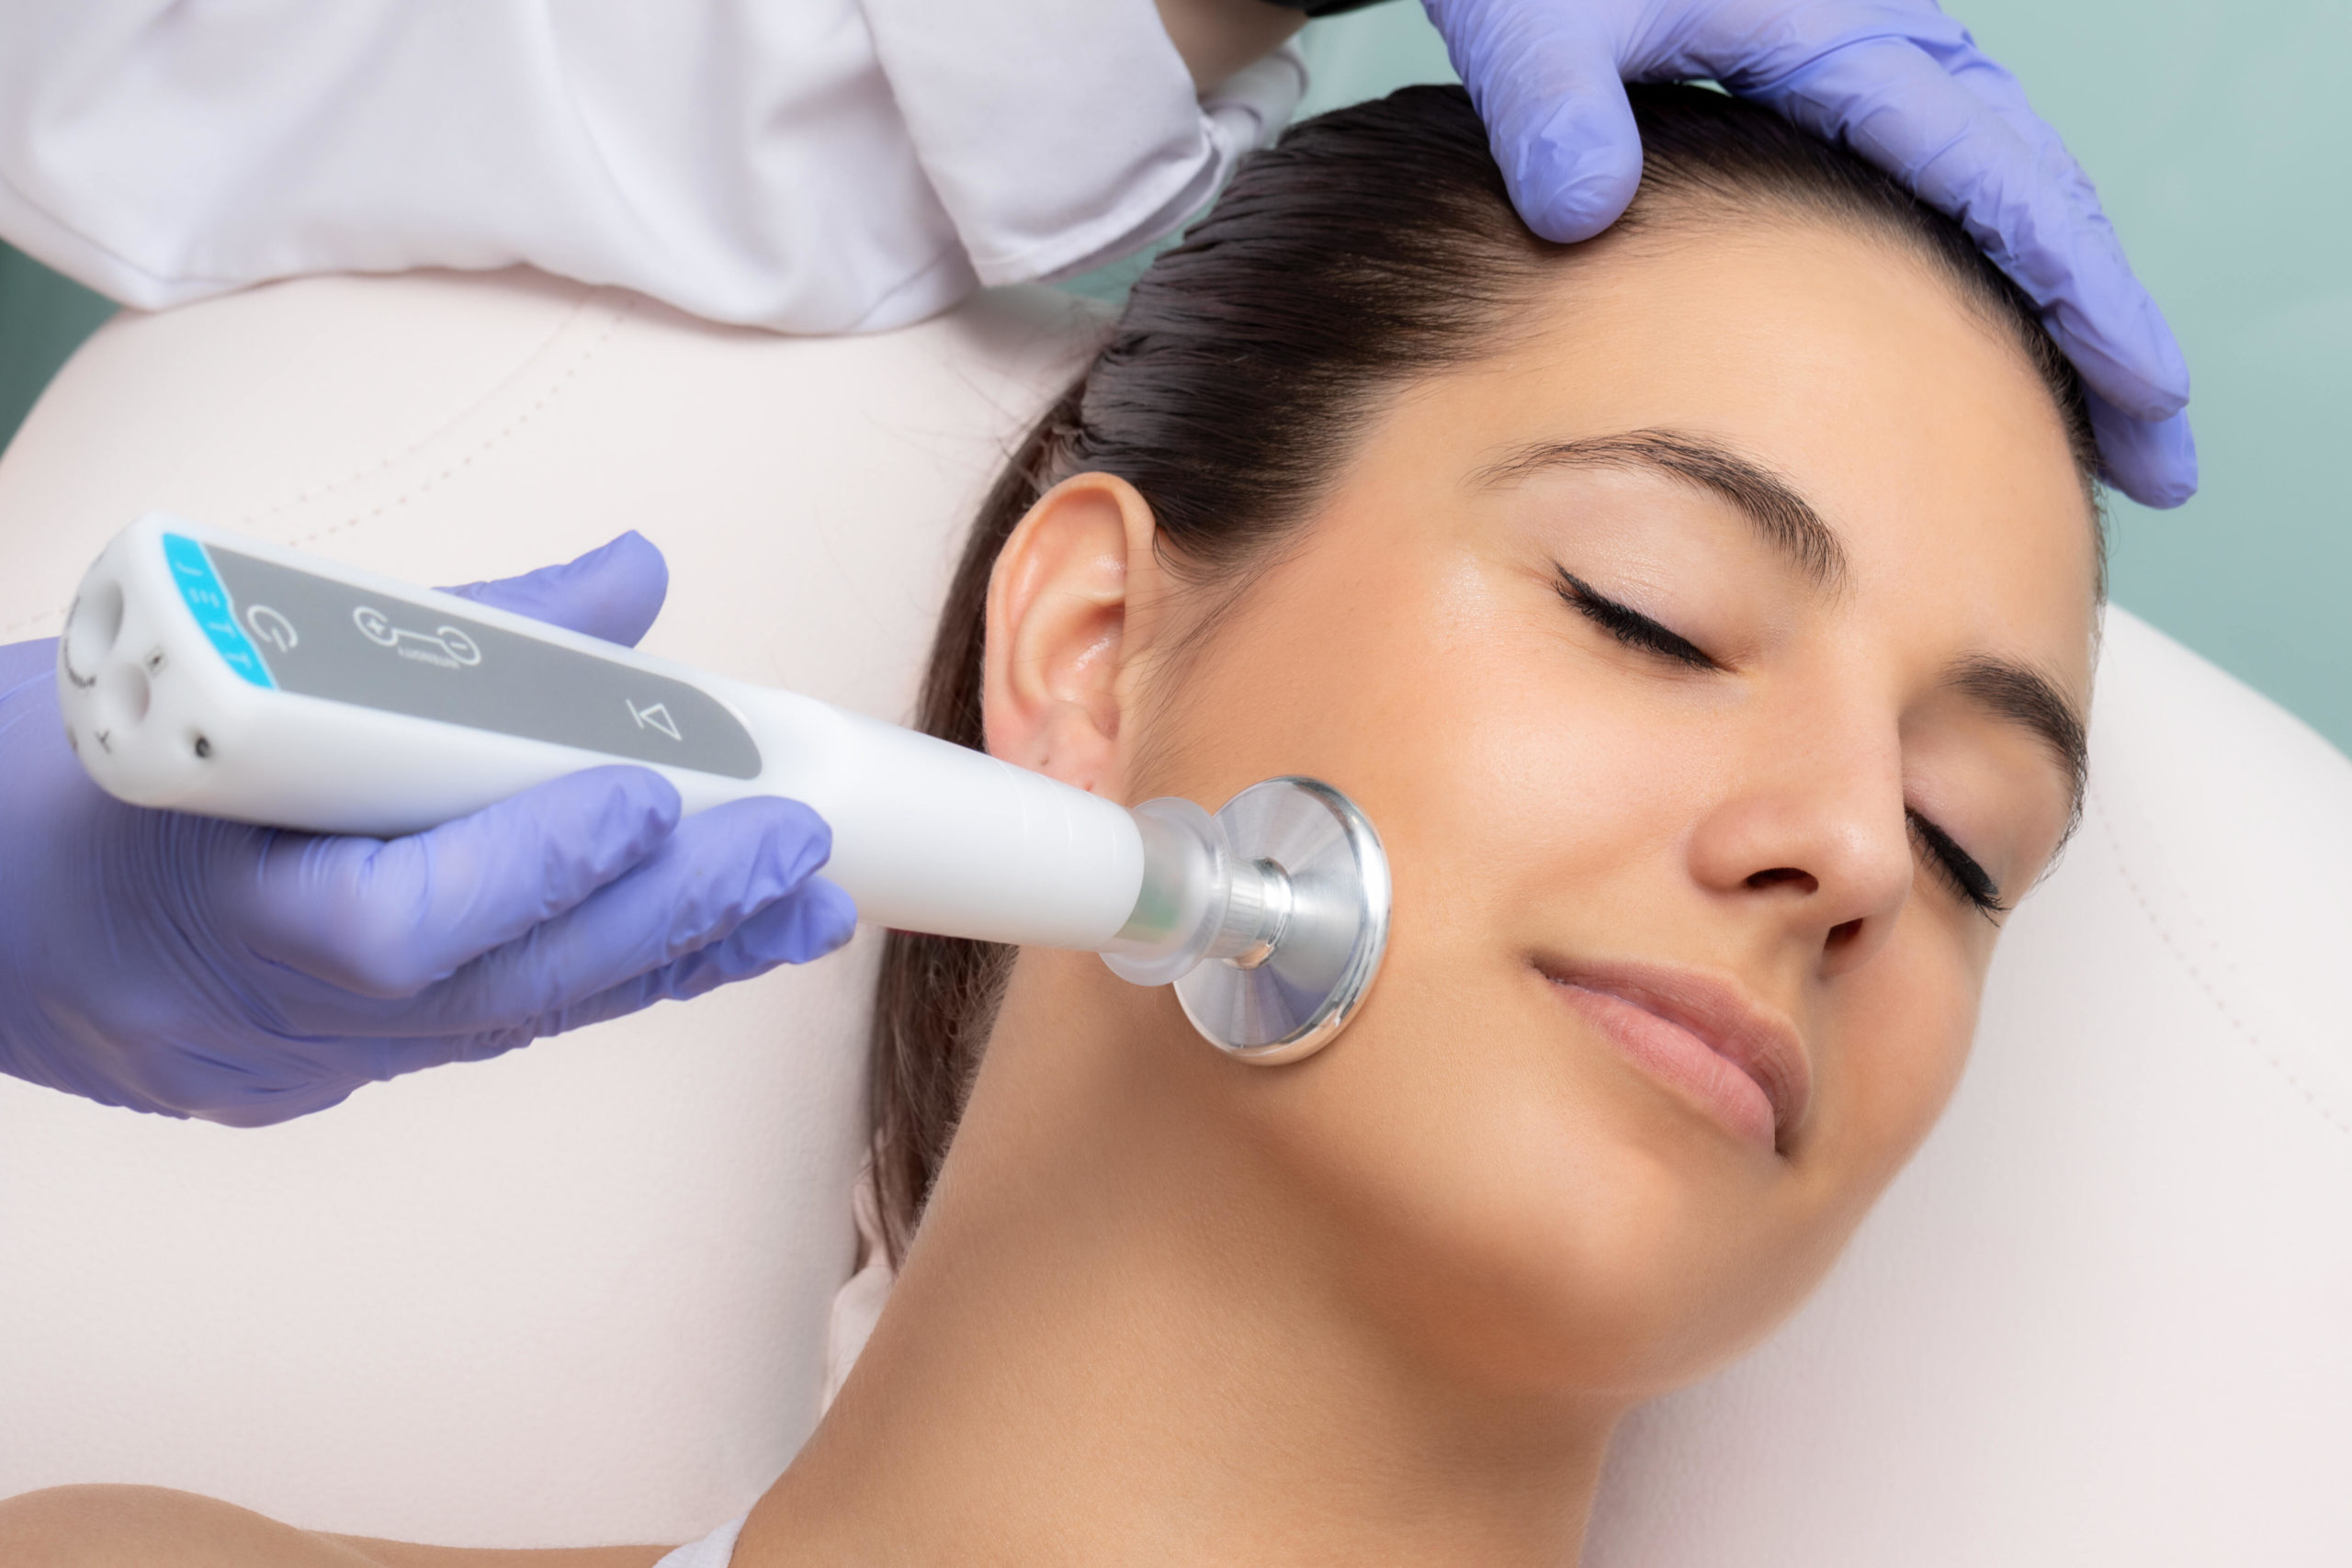 Skin Tightening: How to Improve Skin Firmness and Elasticity